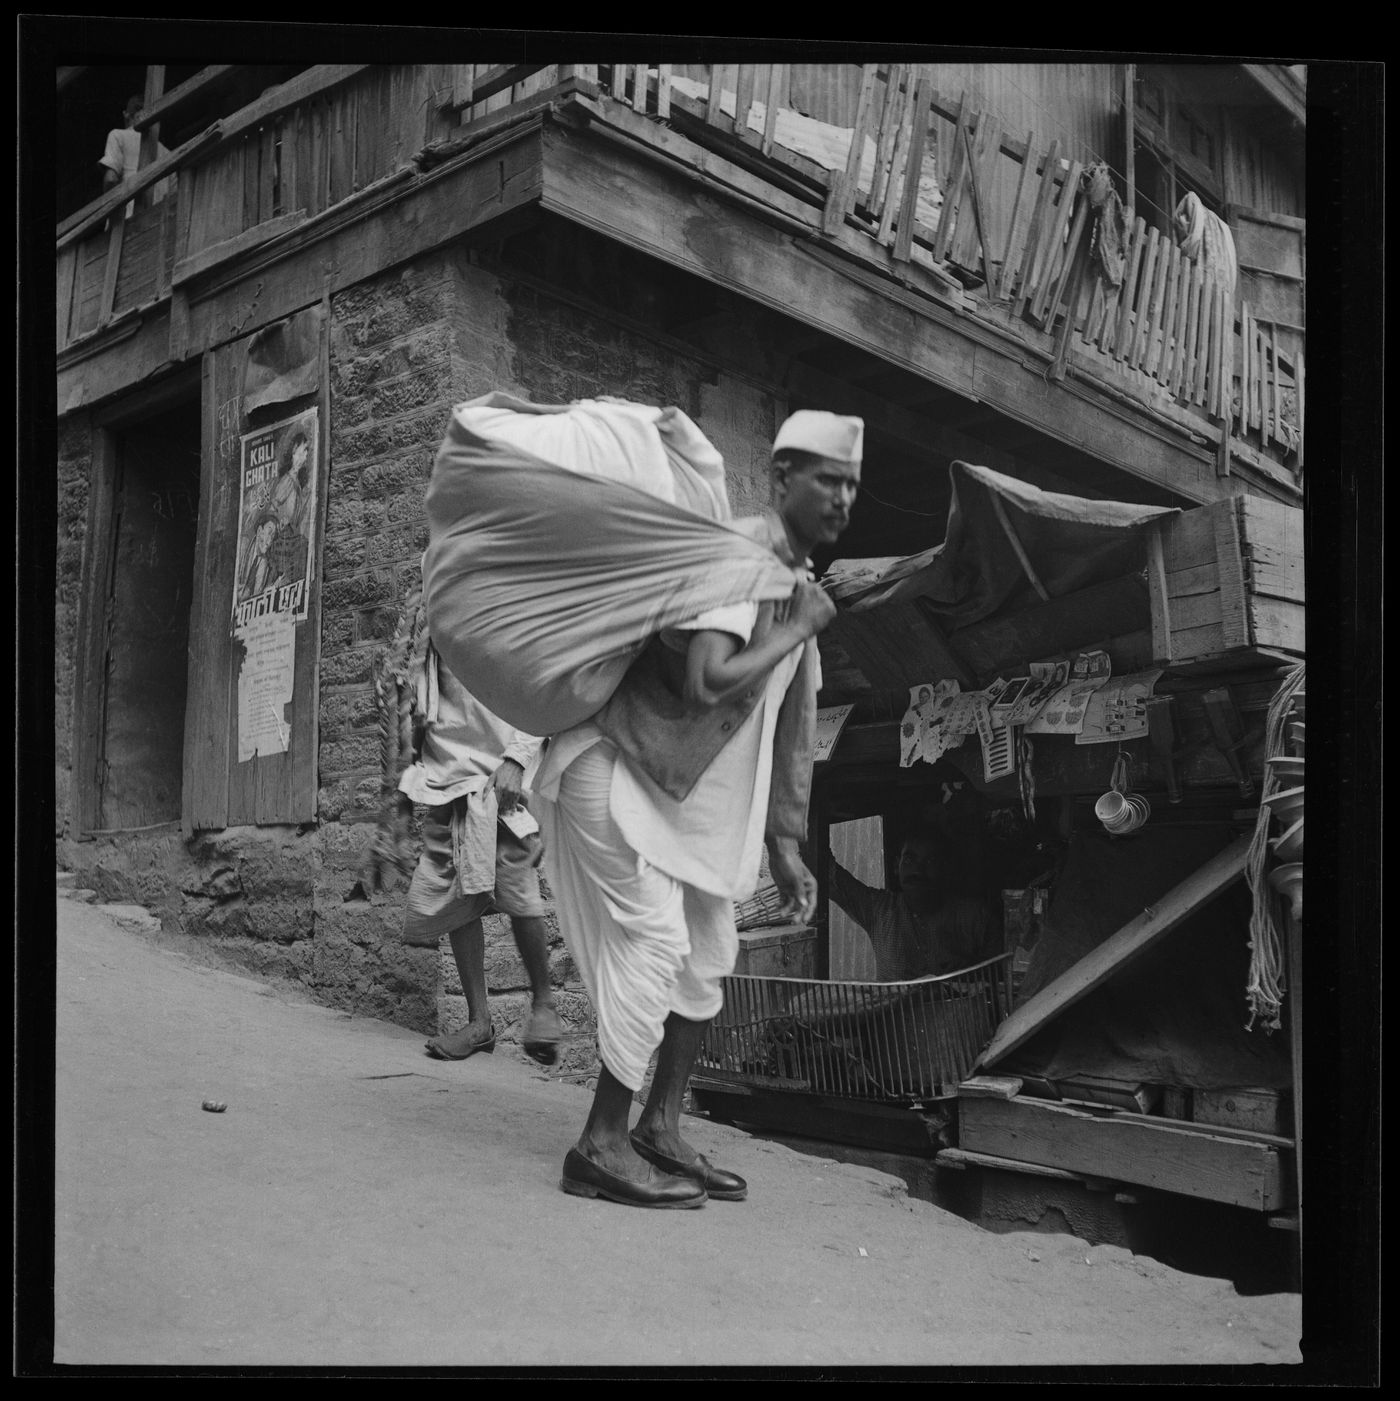 Unidentified man in front of urban building, India